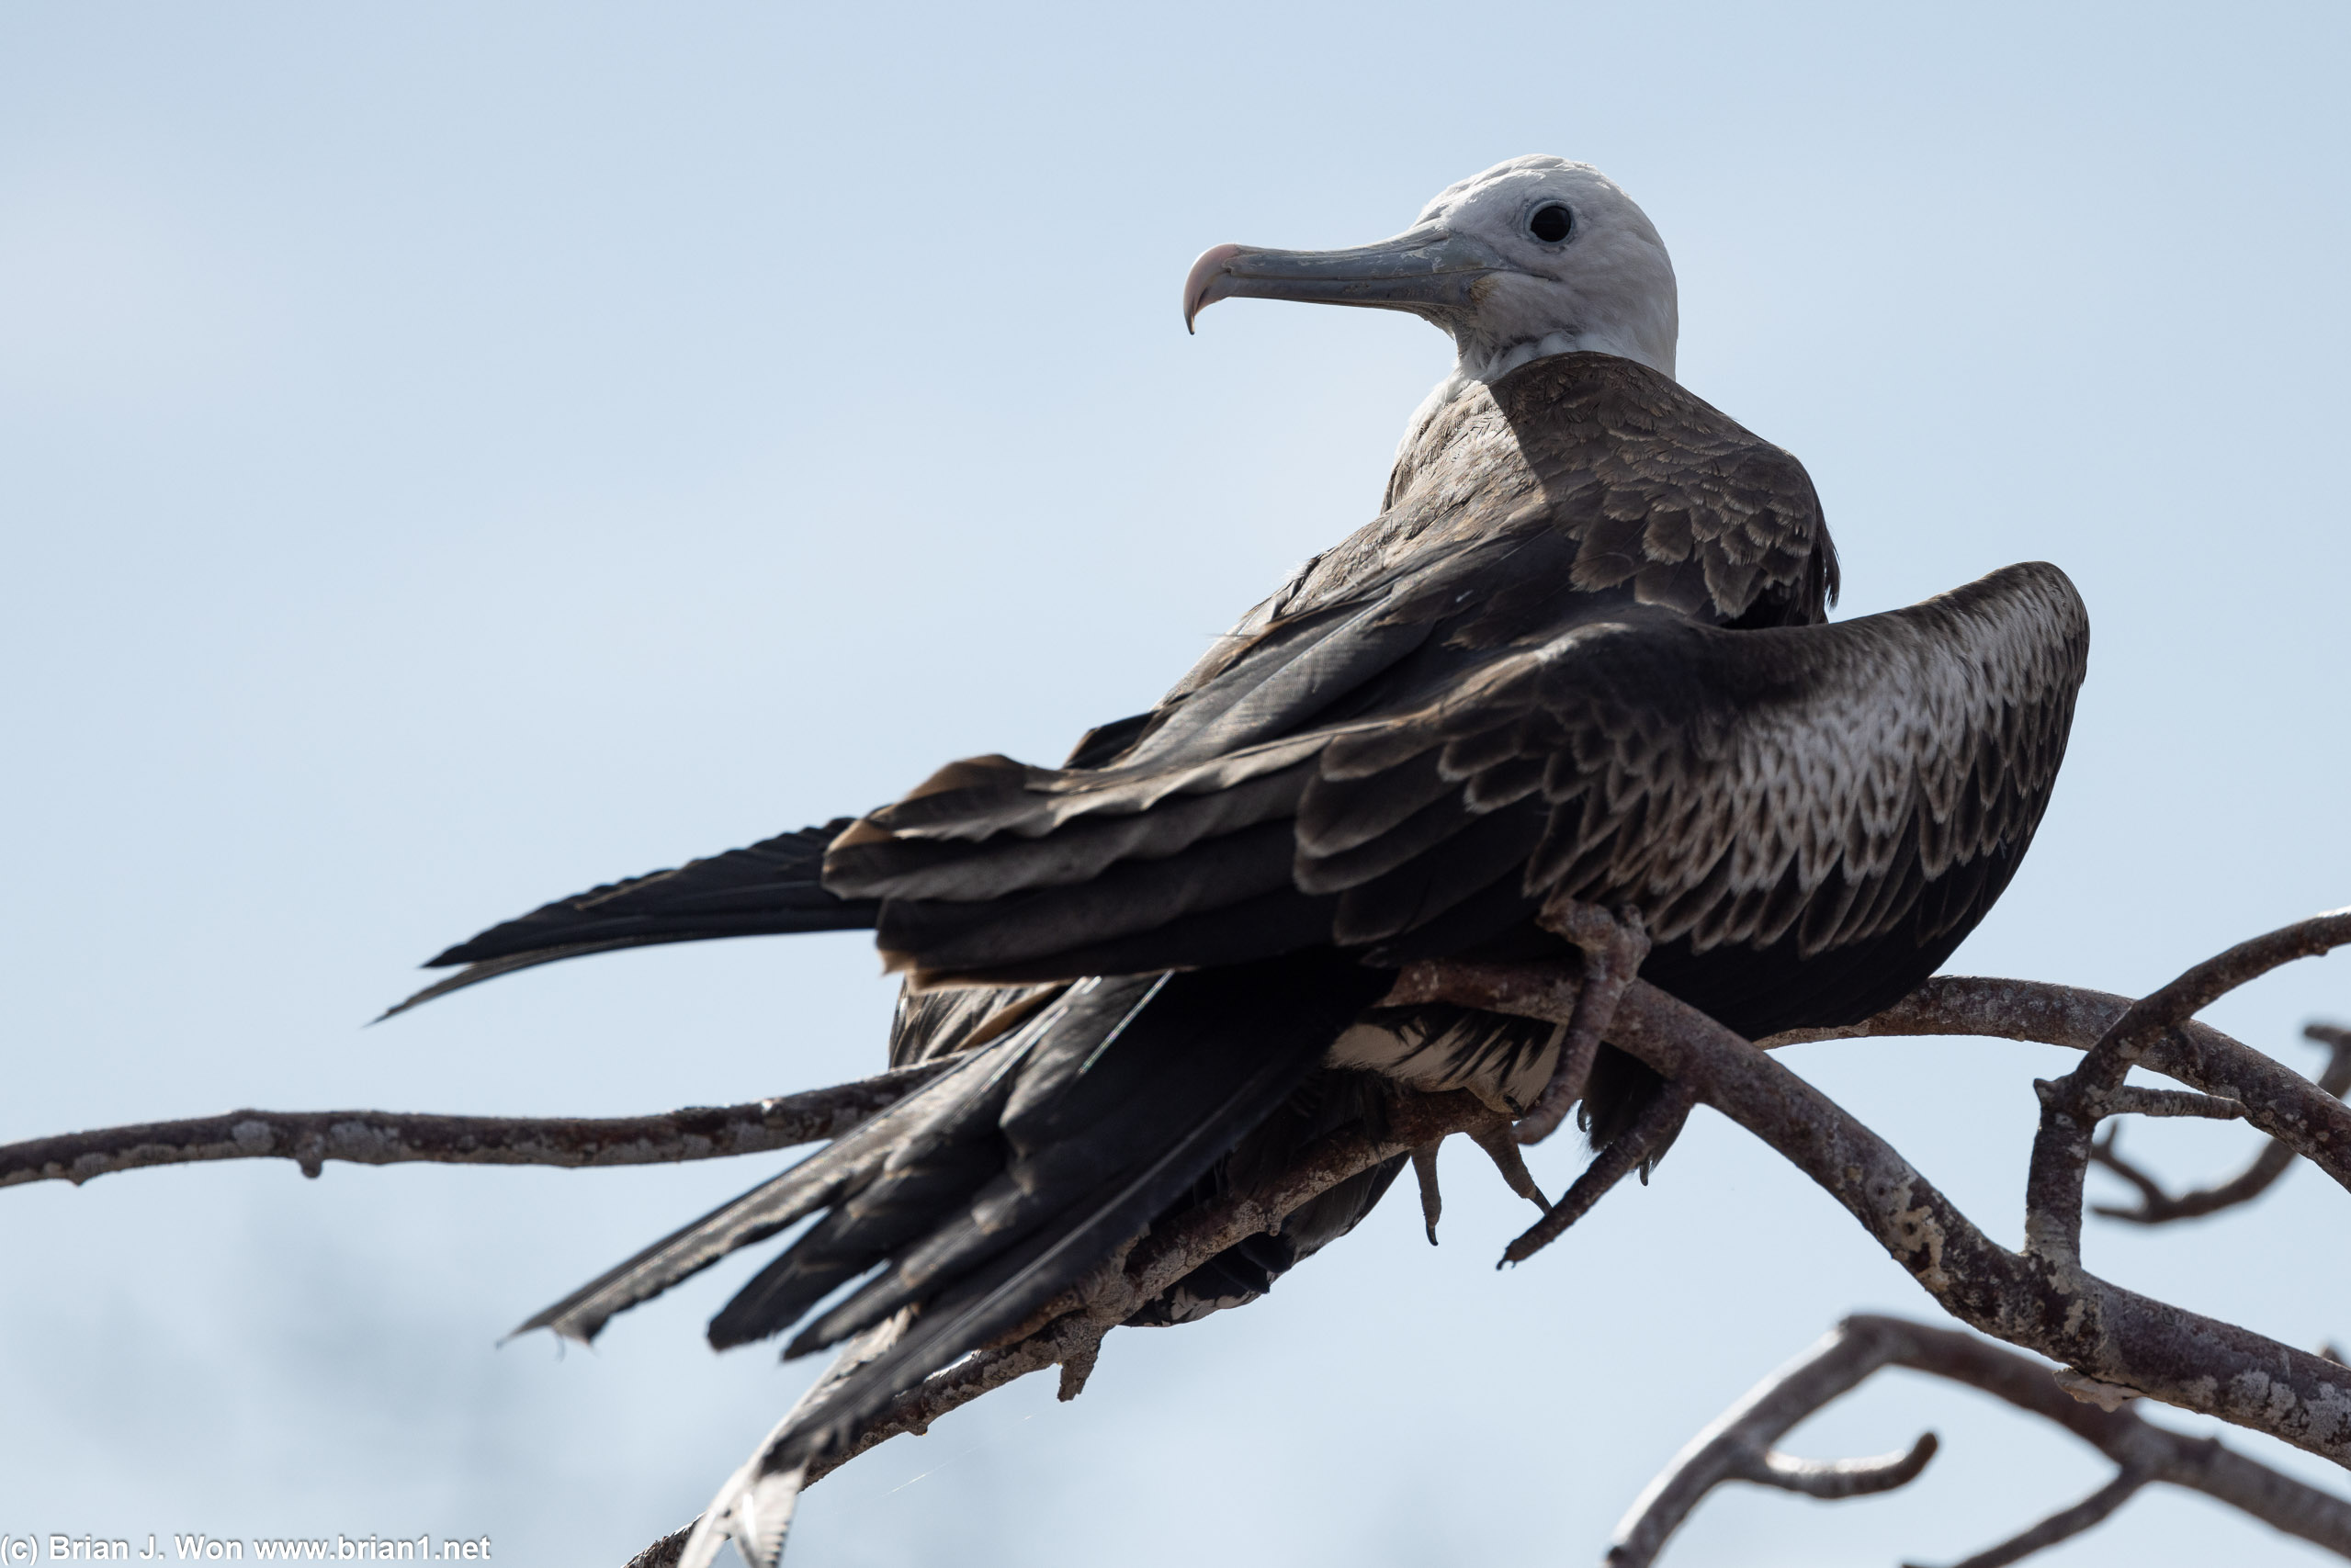 Think this is a female magnificent frigatebird due to the blue eye ring.